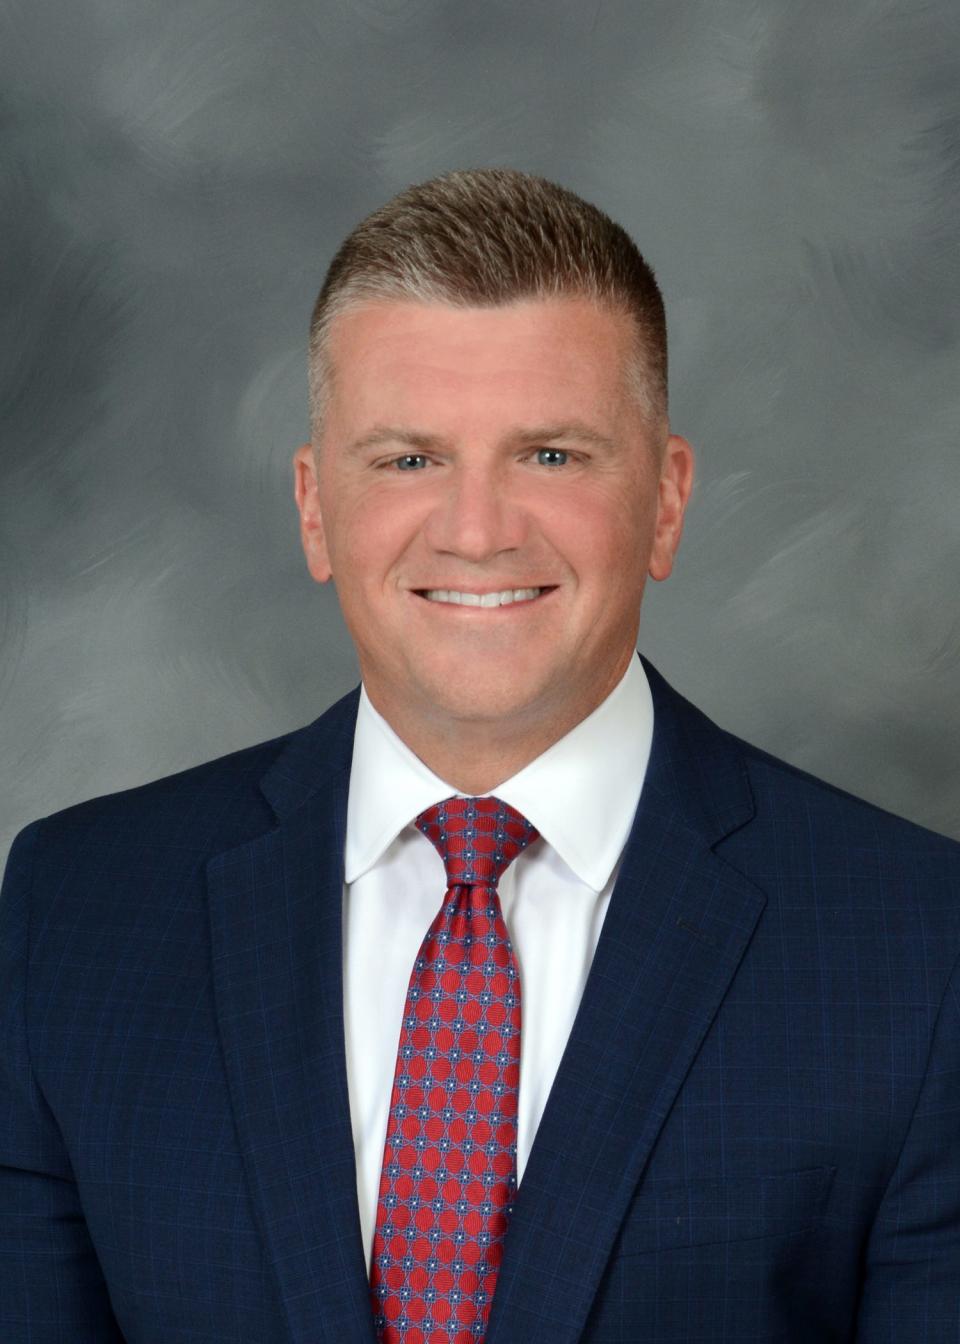 Dr. Abram Lucabaugh is a seventeen-year employee of the Central Bucks School District. The superintendent served as Central Bucks High School East's principal for eleven years before being appointed assistant superintendent of secondary education in 2018.